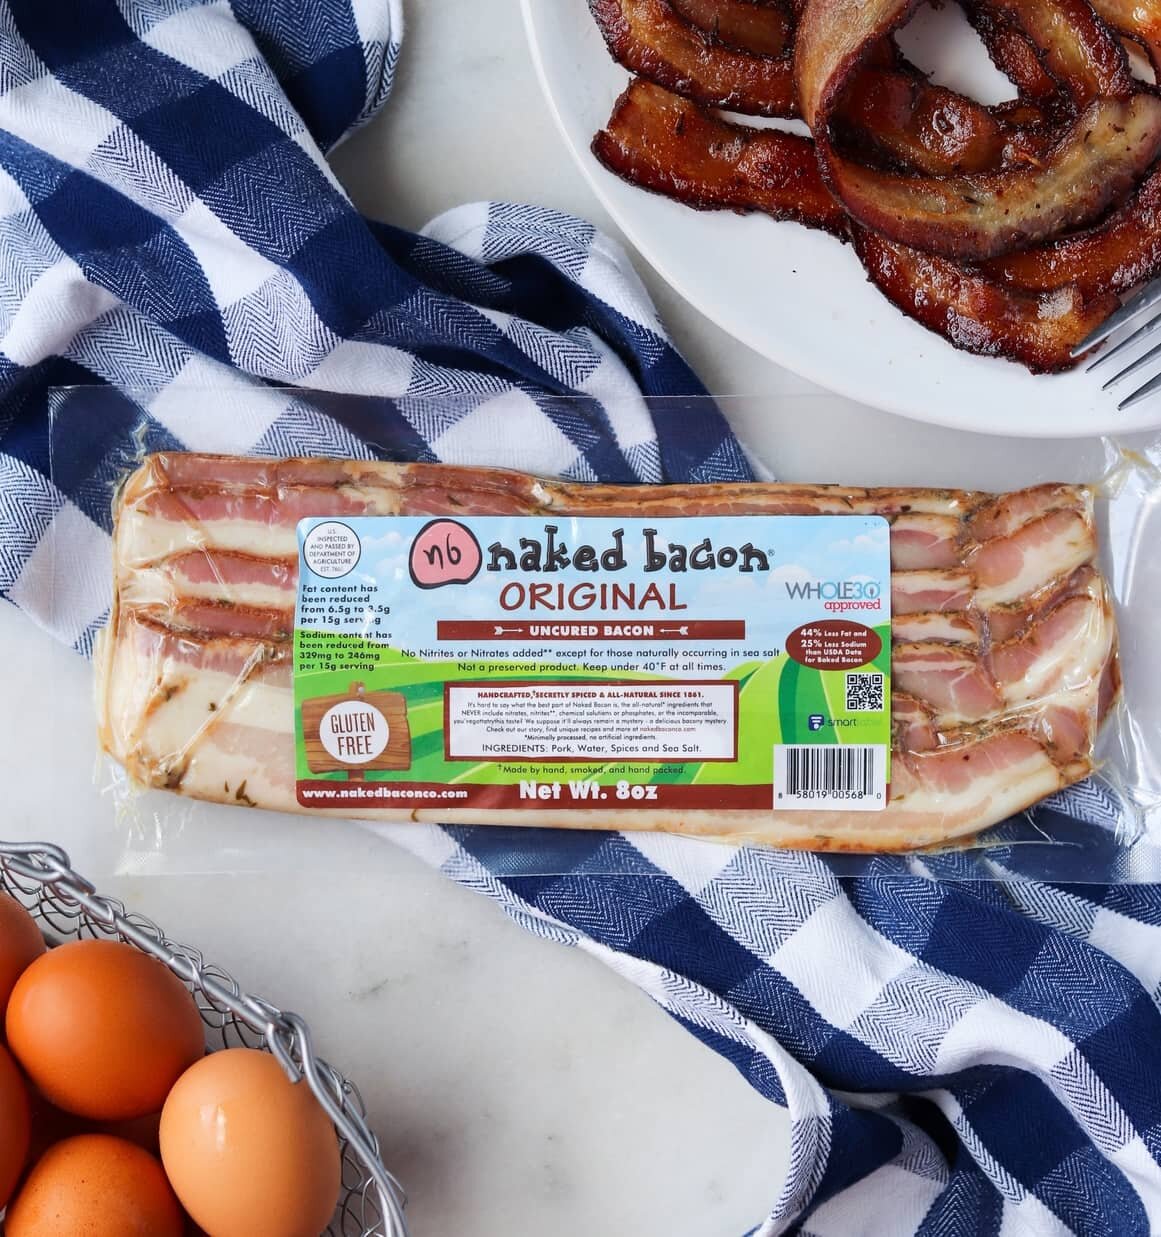 Original Naked Bacon - Whole30 Approved.jpg